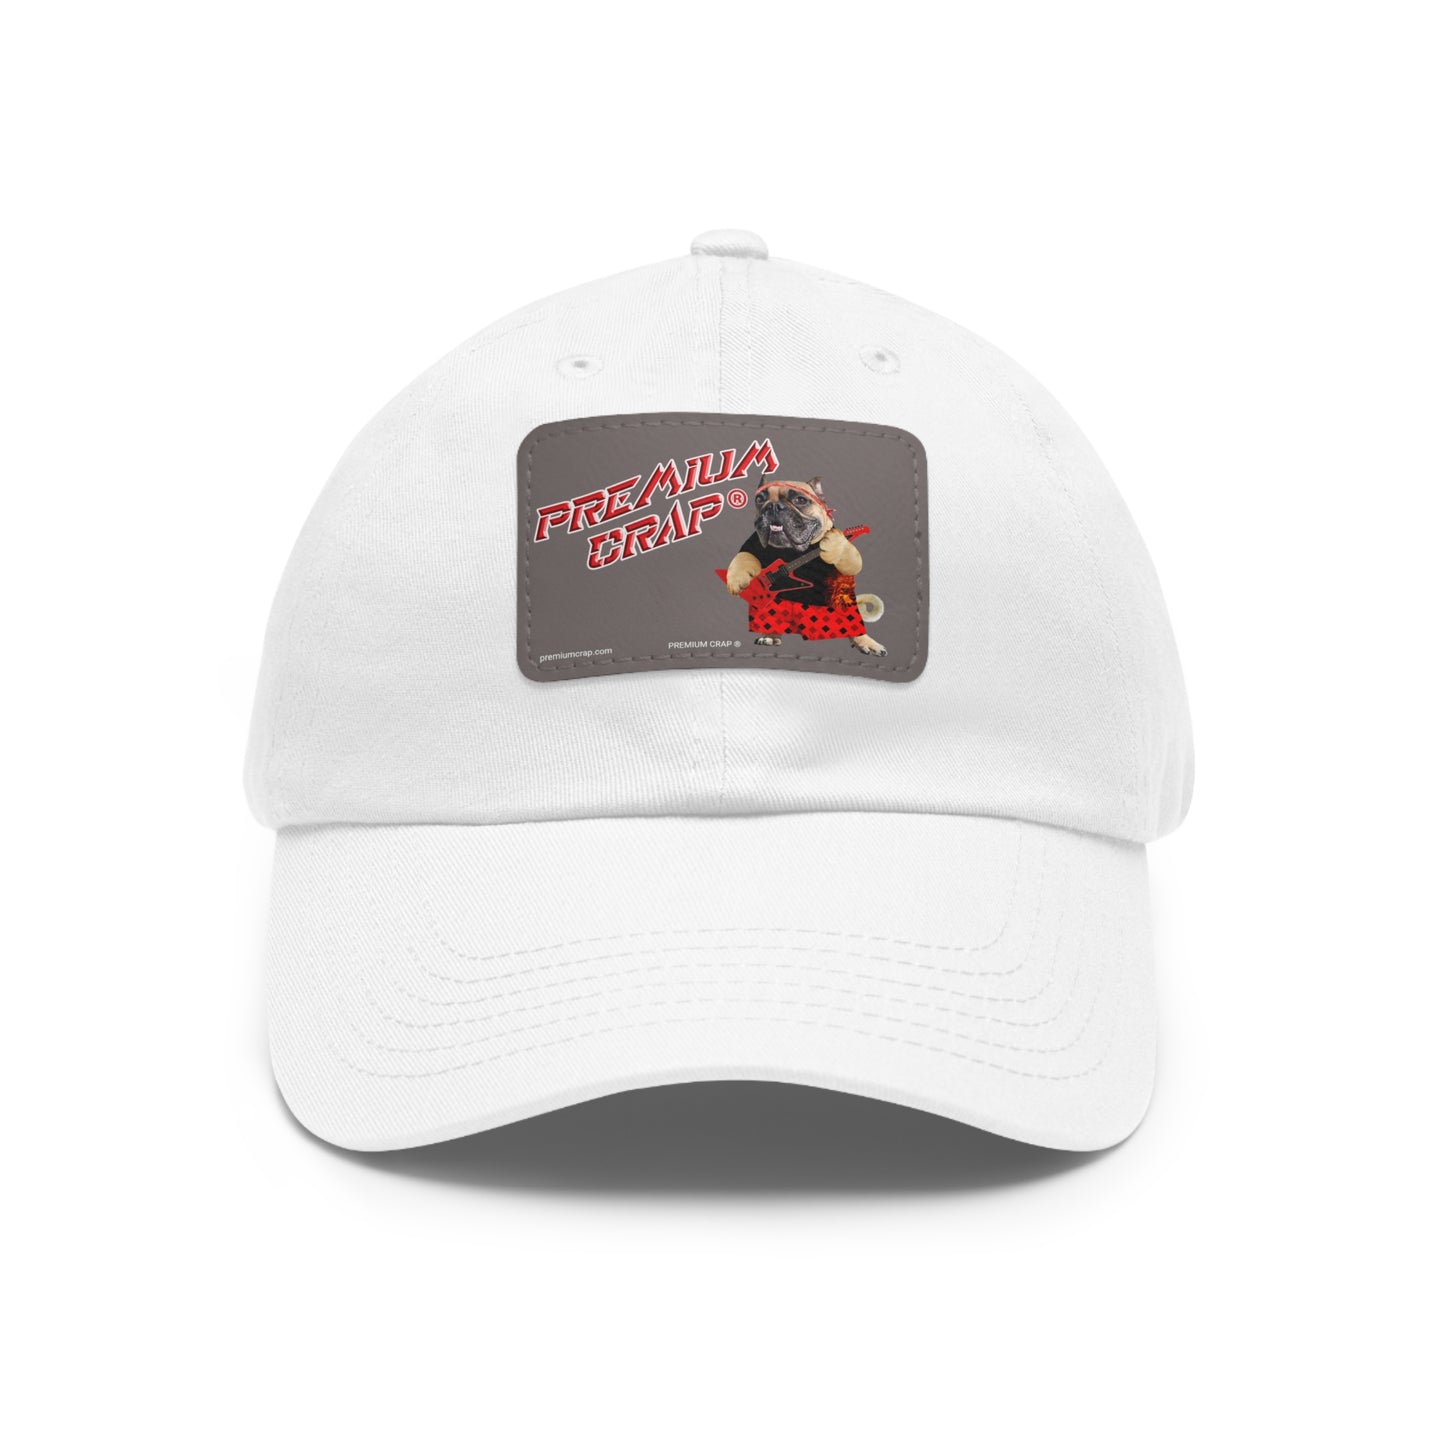 Premium Crap II Dad Hat with Leather Patch (Rectangle)